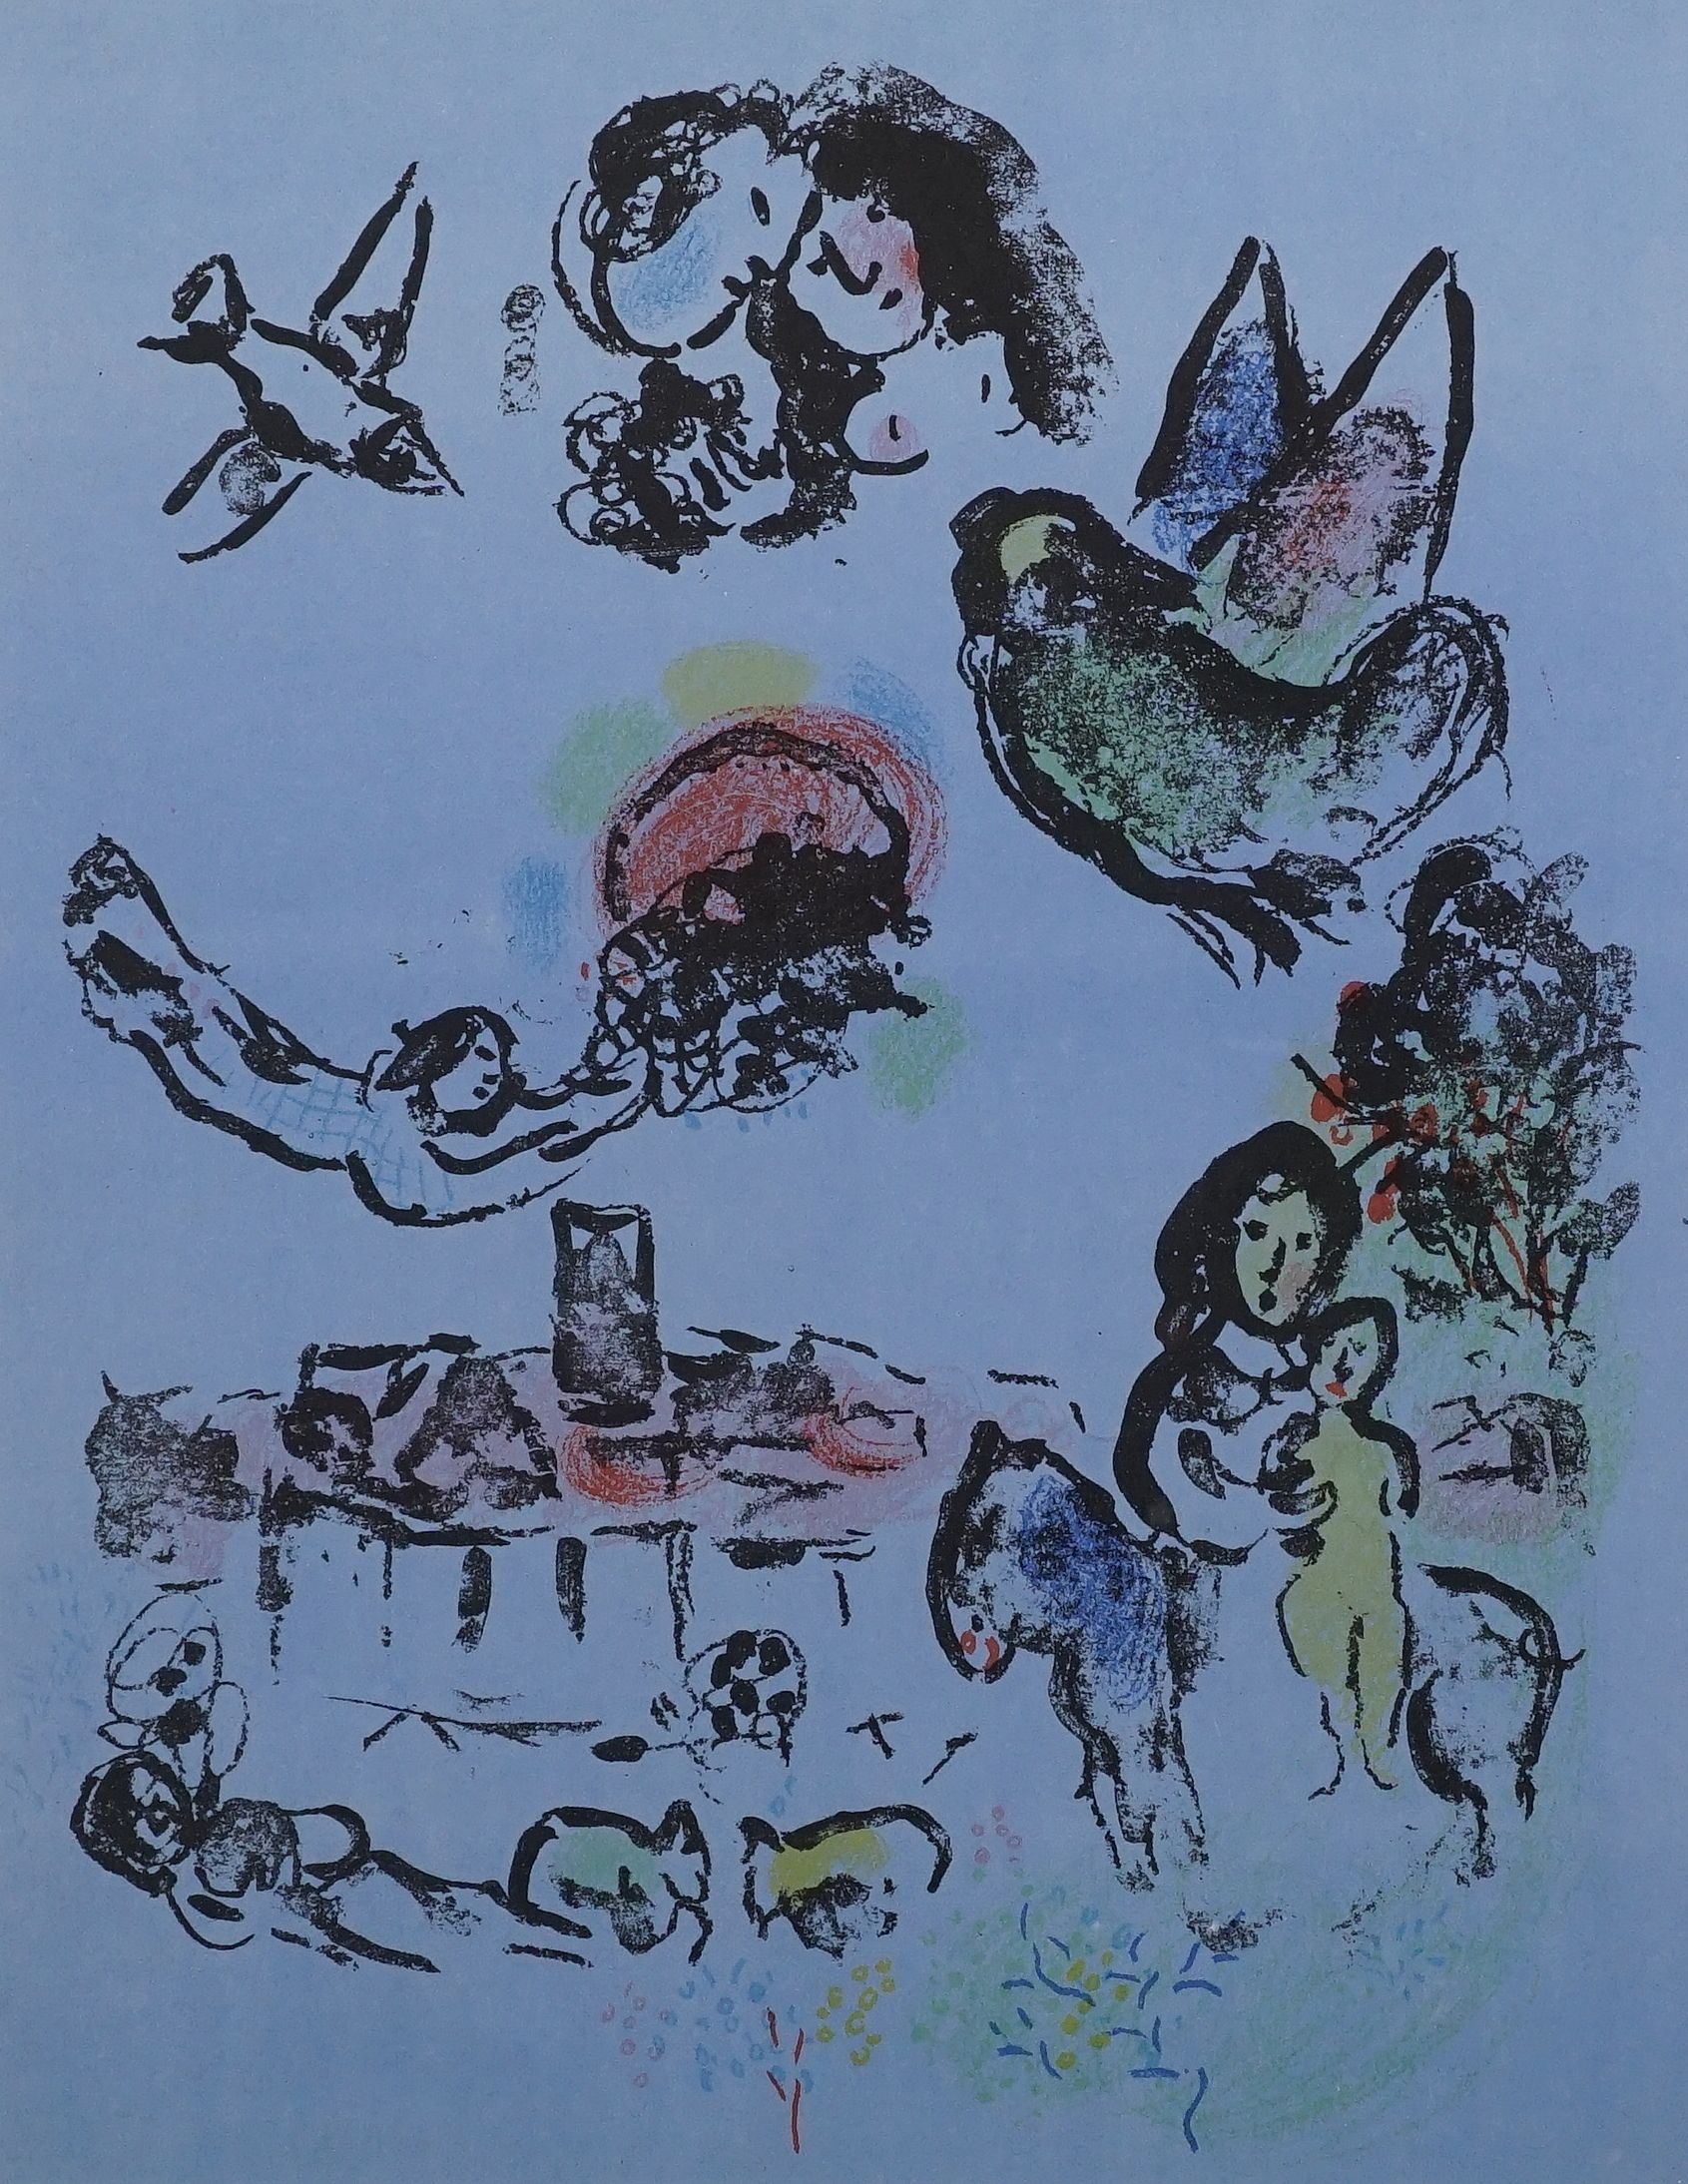 Night in Vence by Marc Chagall, 1963